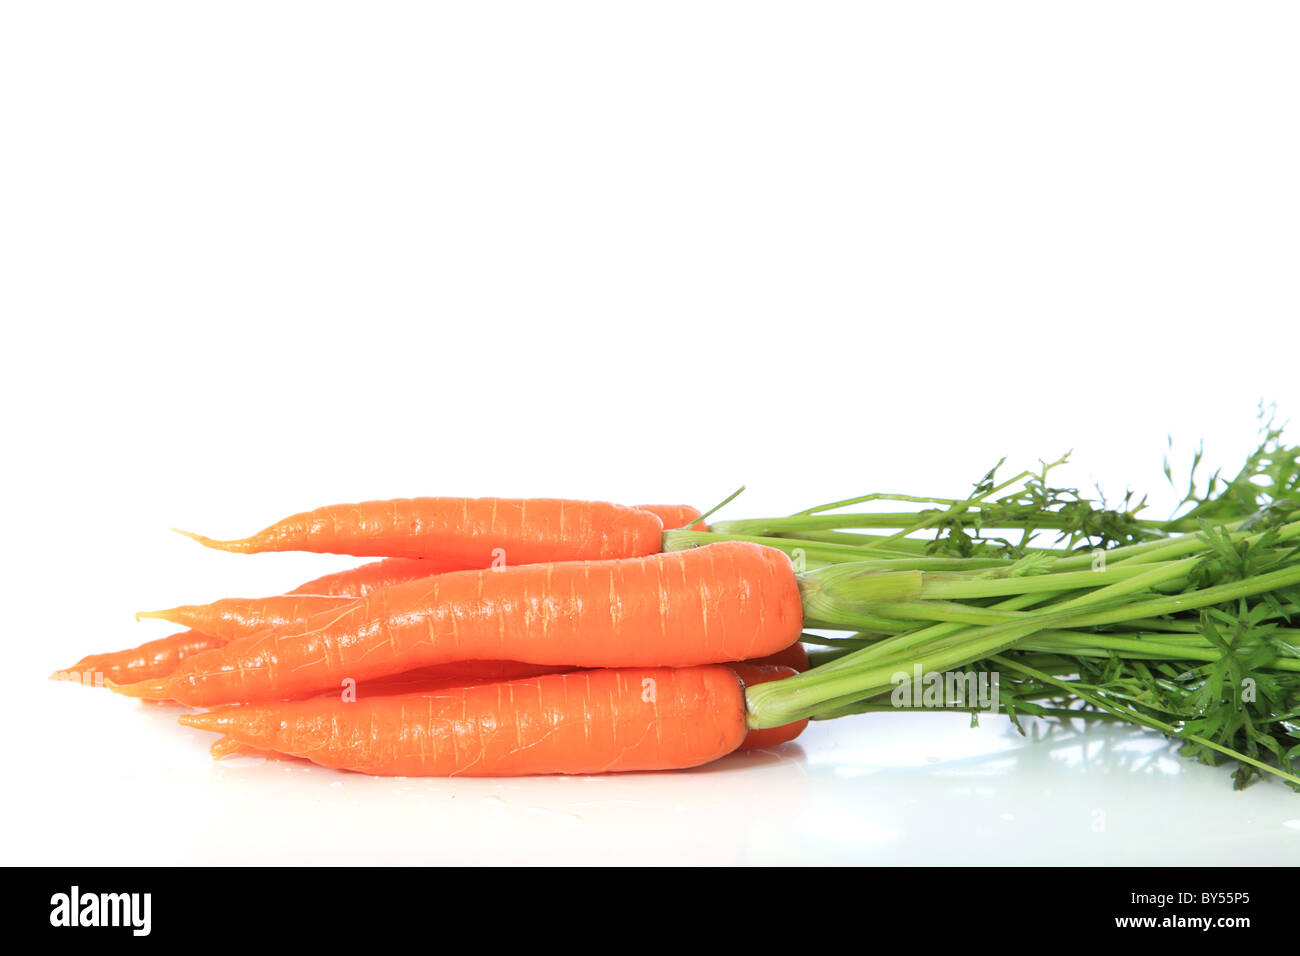 Fresh carrots. All on white background. Stock Photo